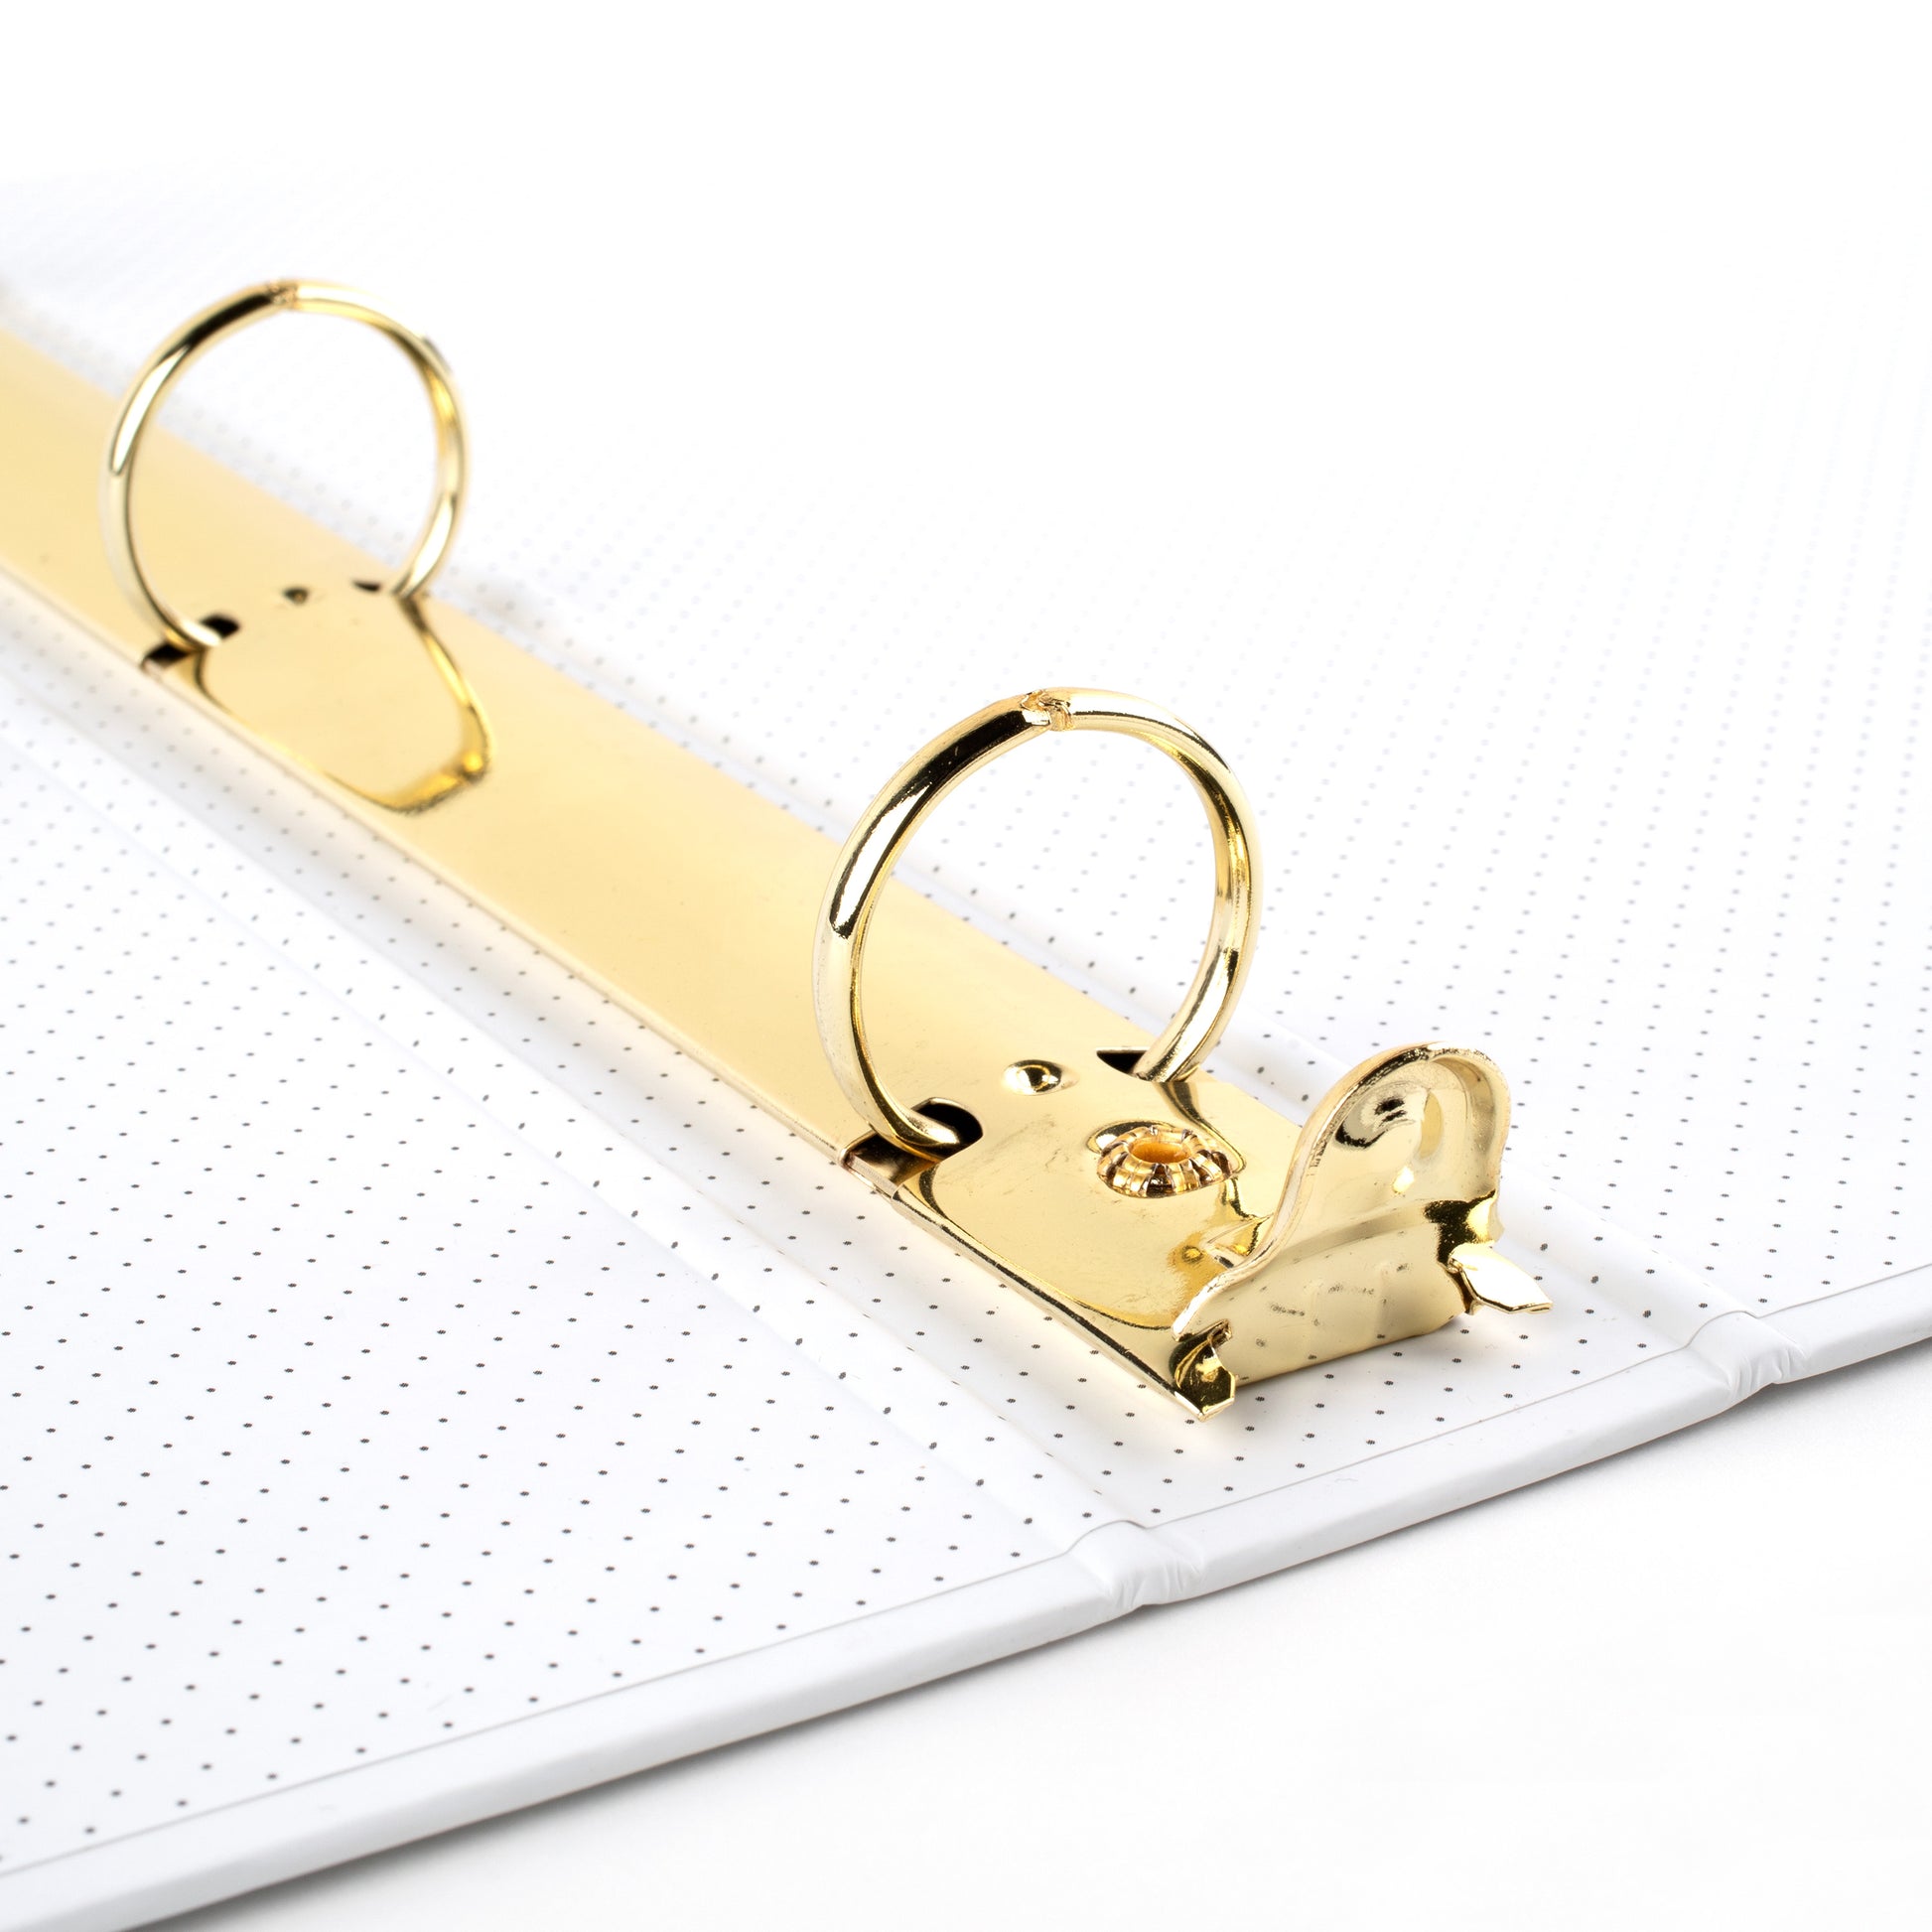 closeup on gold binder rings in white binder with black dots